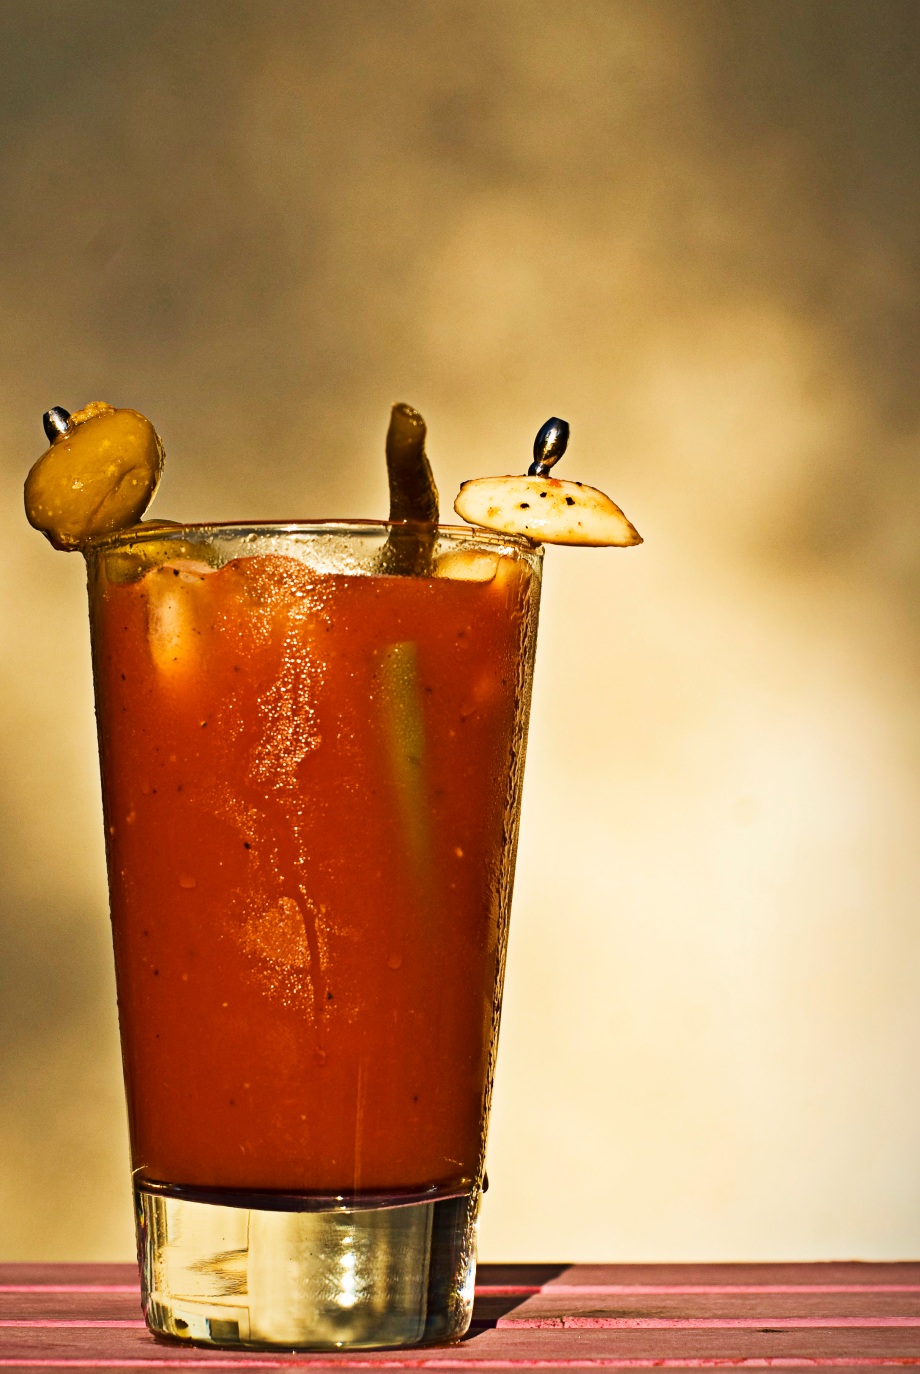 Dirty, back alley Bloody Mary